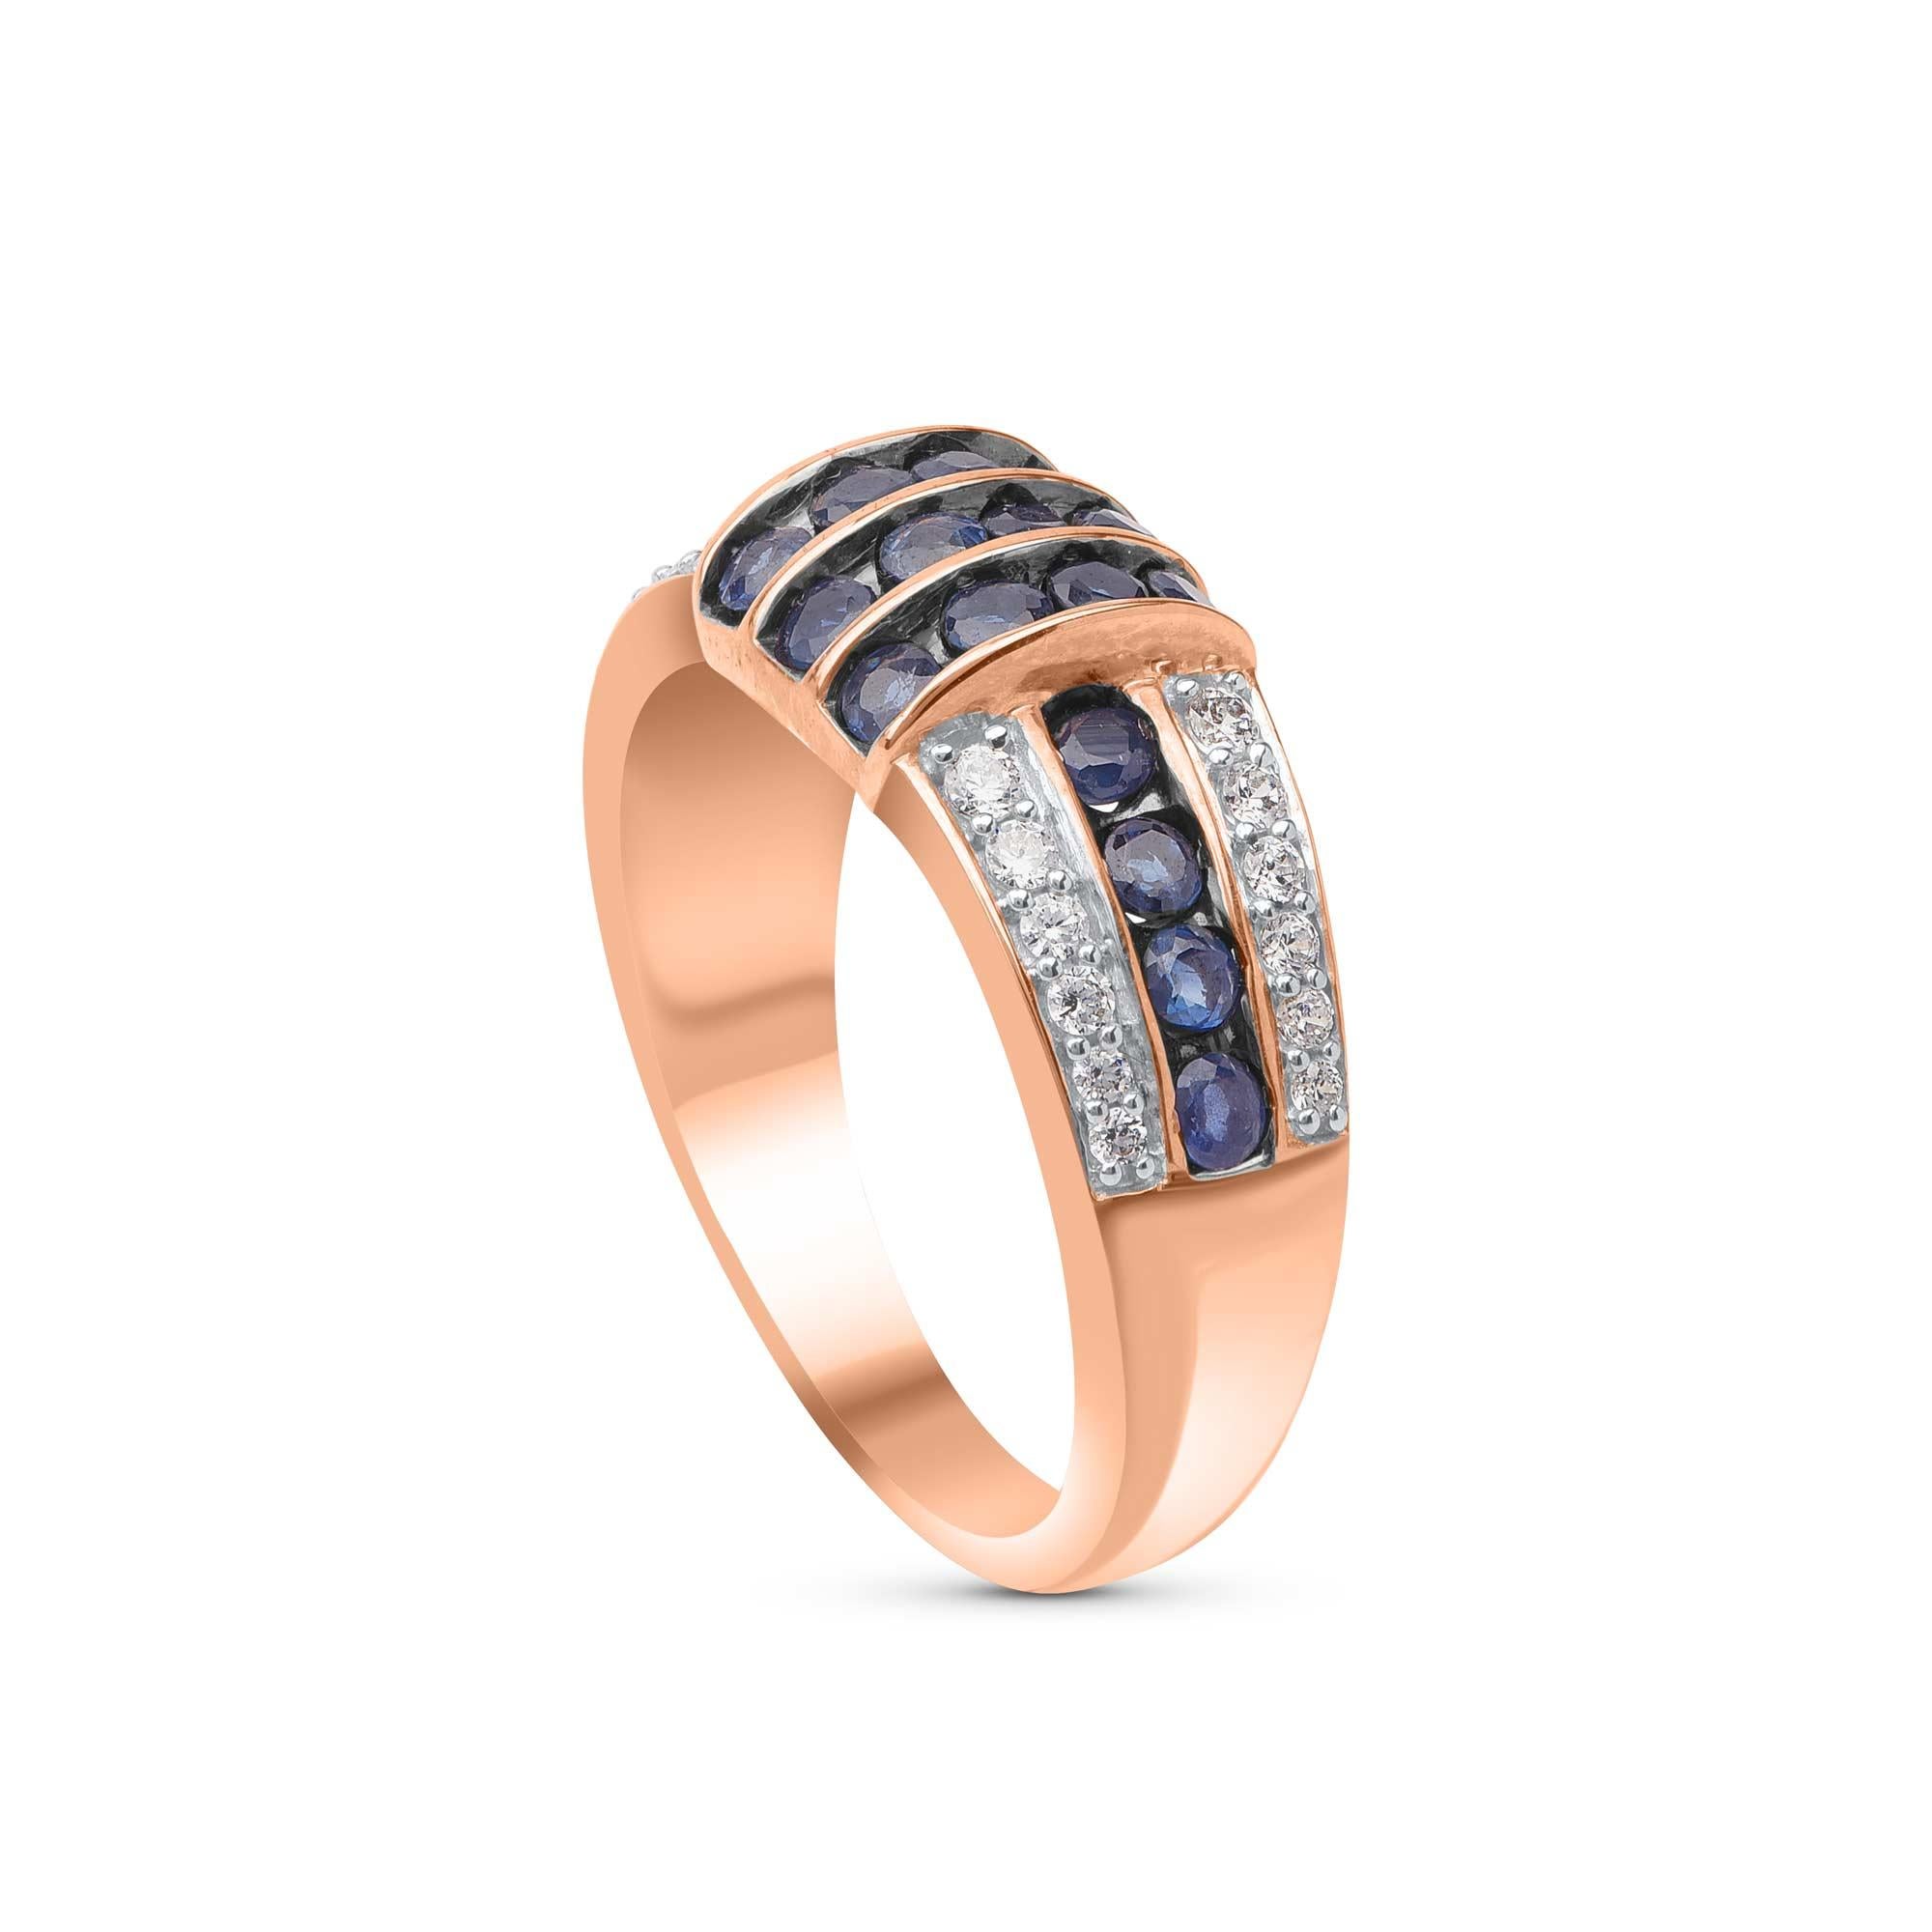 This wedding band features 24 brilliant natural diamond and 20 natural blue sapphire set beautifully in pave and nick setting - crafted by our in-house experts in 18 kt rose gold. The diamonds are graded H-I Color, I2 Clarity.  

Metal color and